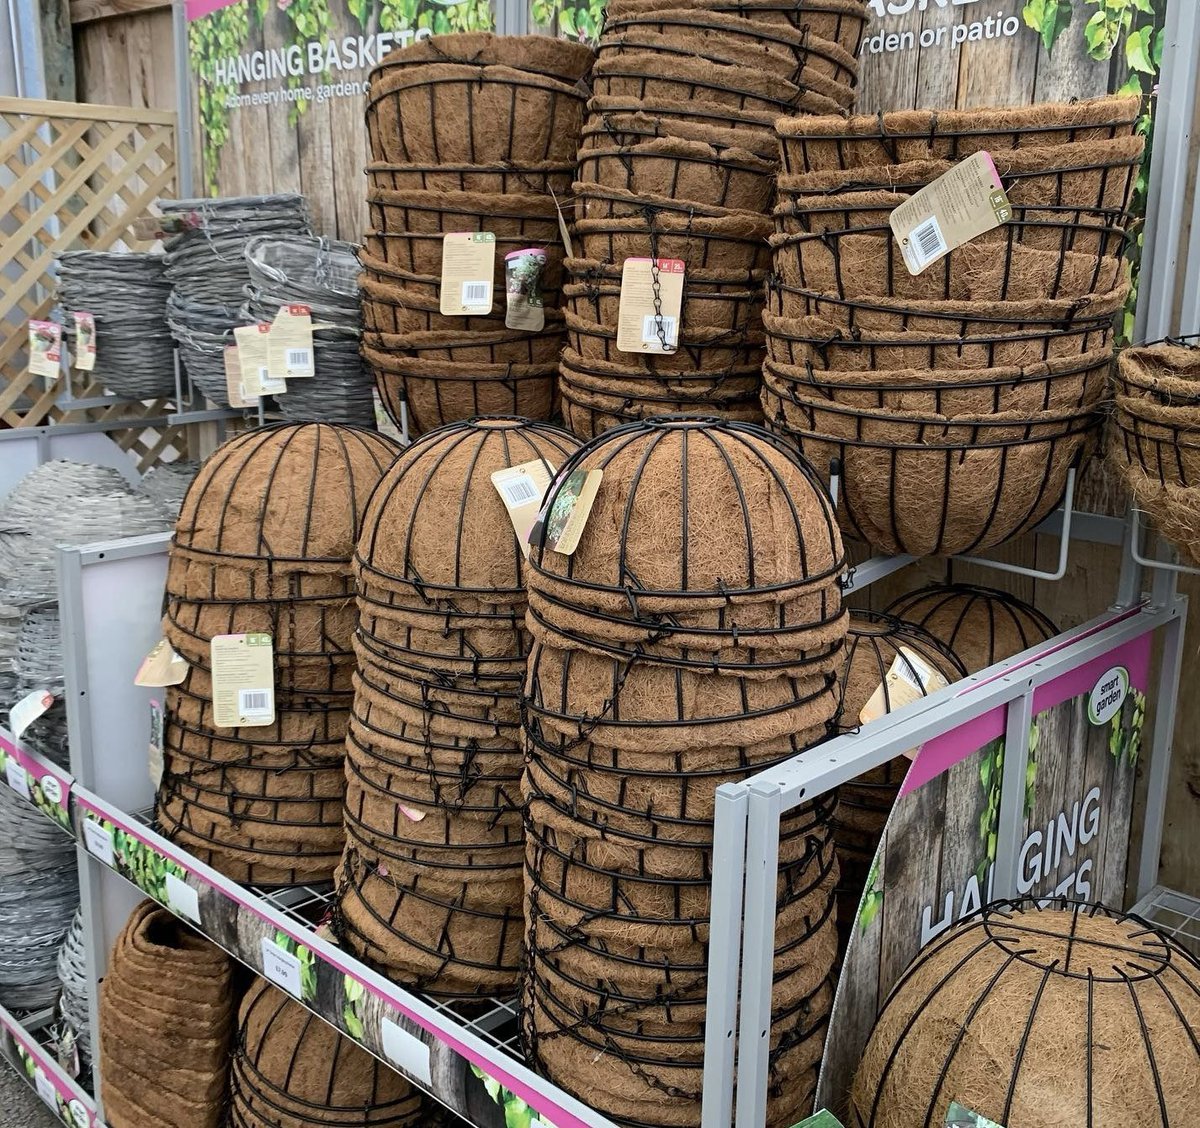 ✨🌷Our new range of hanging baskets are in! 🌷✨
It’s the perfect time to start preparing for your summer baskets! 
#hangingbaskets #woburnsandsemporium #wse #woburnsands #gardencentre #miltonkeynes #summer #summerbaskets